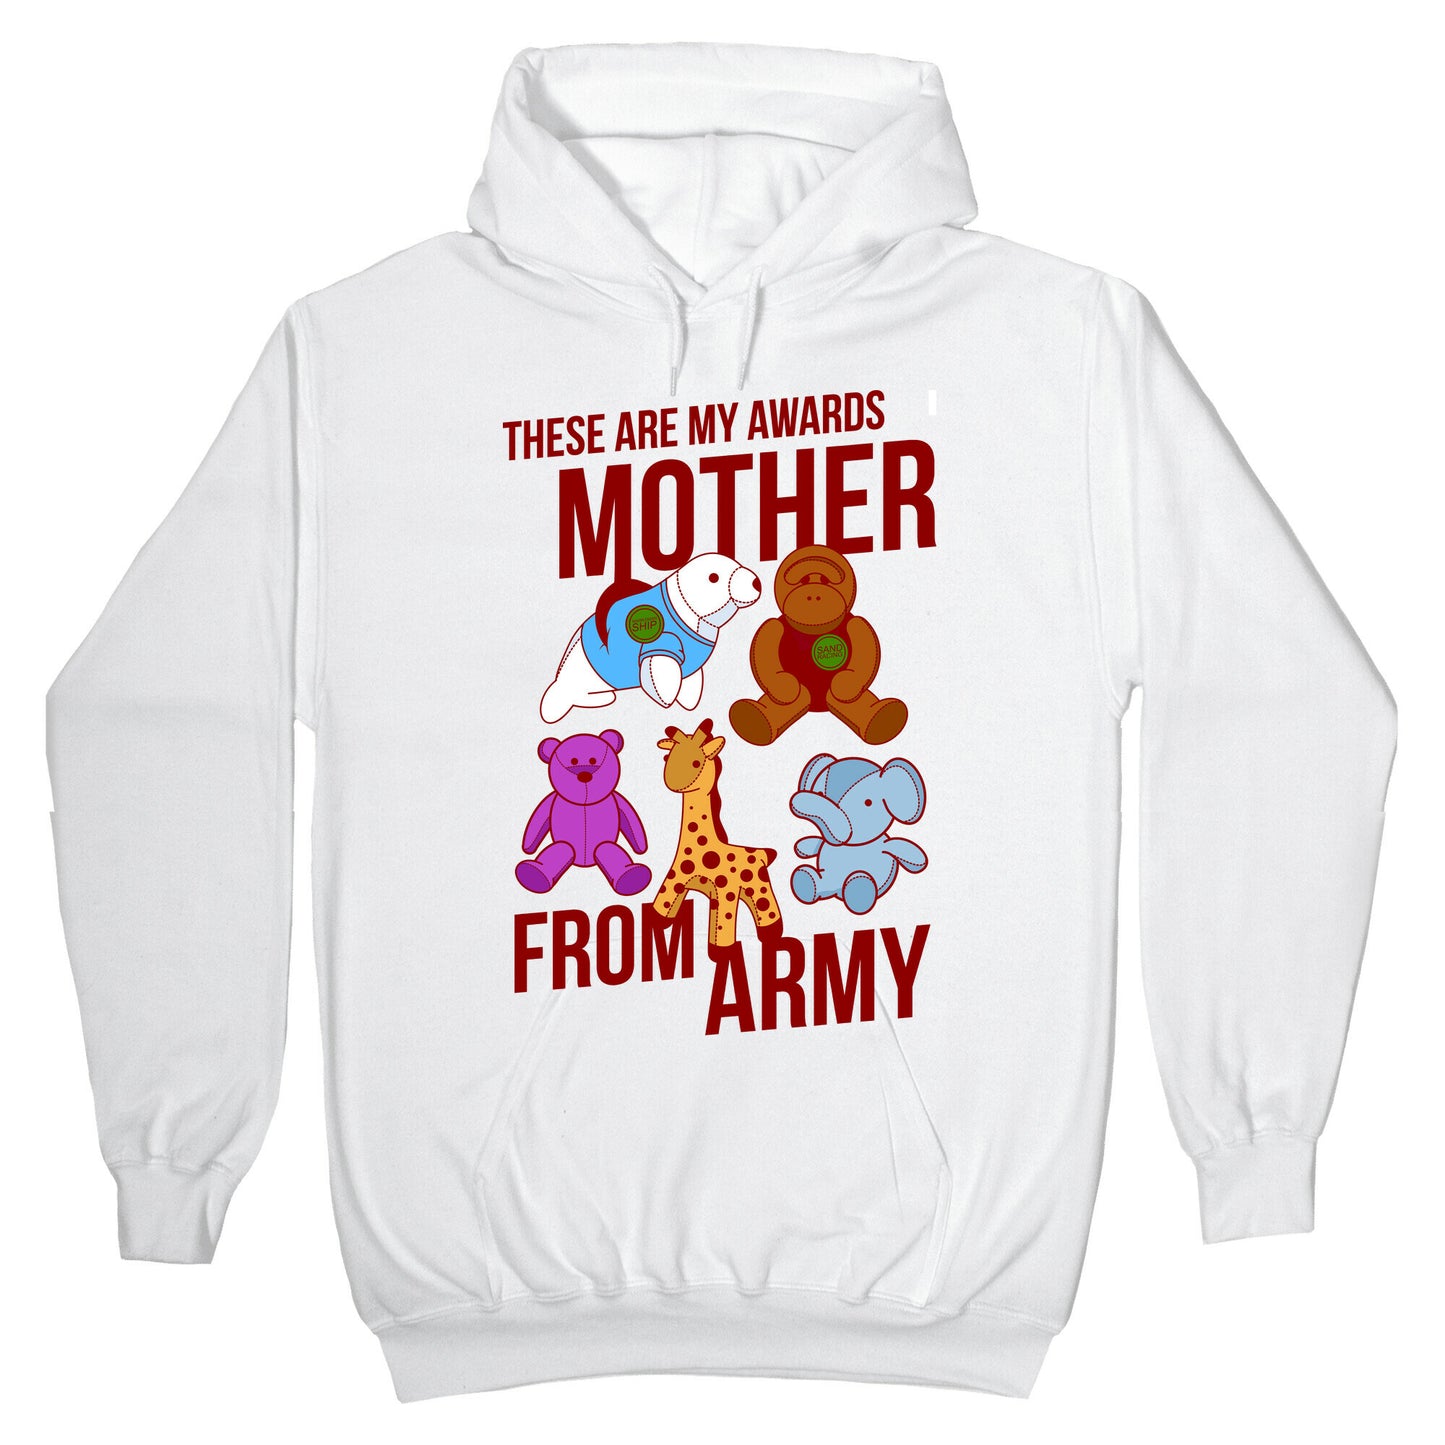 These Are My Awards, Mother Hoodie